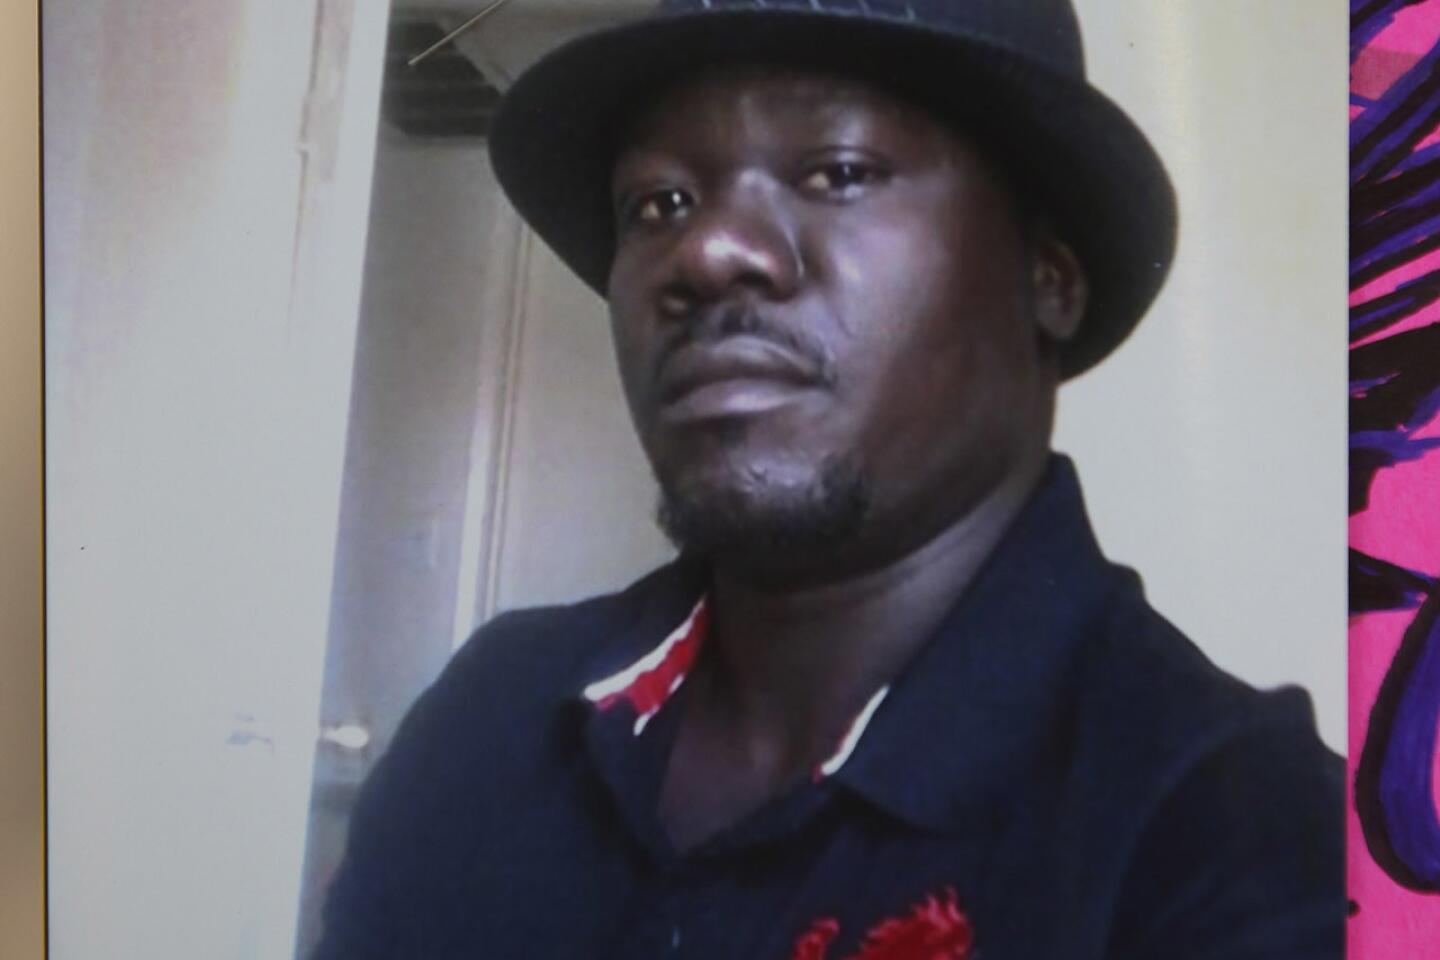 Alfred Olango remembered at the shooting scene